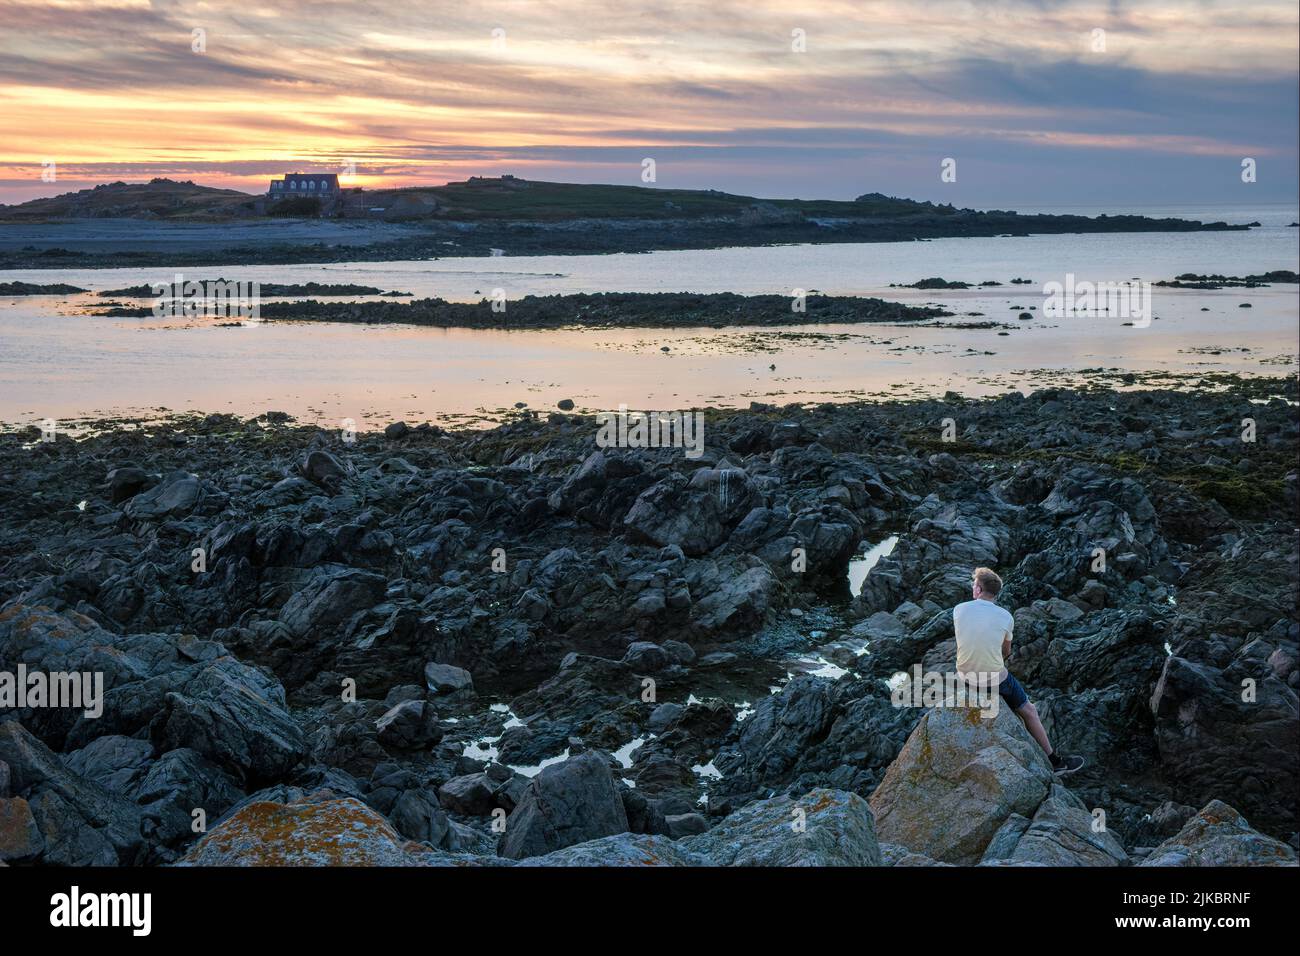 A man watching the sun setting over Lihou Island from L'Erée, Guernsey, Channel Islands Stock Photo